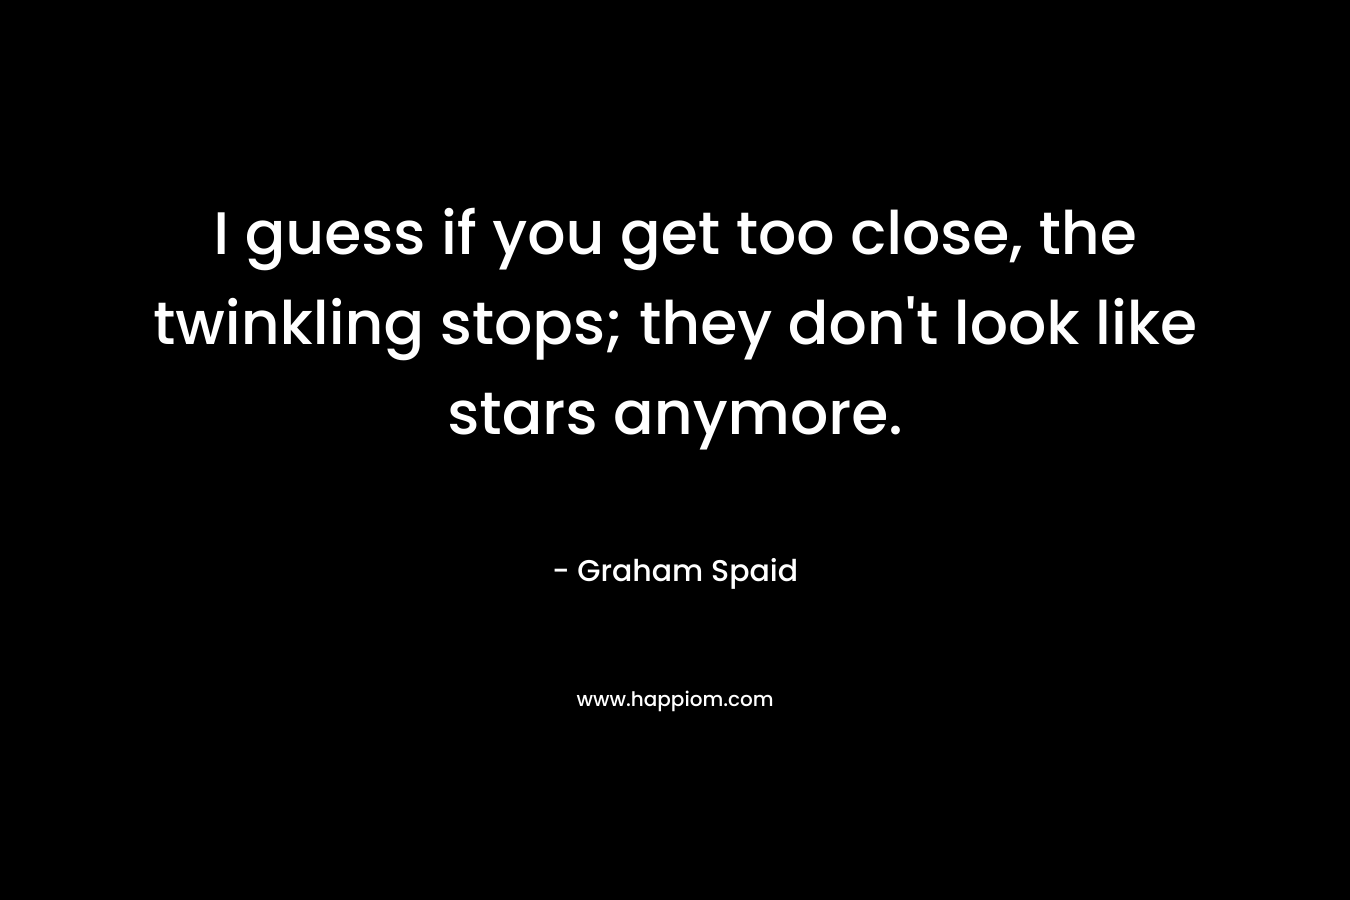 I guess if you get too close, the twinkling stops; they don't look like stars anymore.